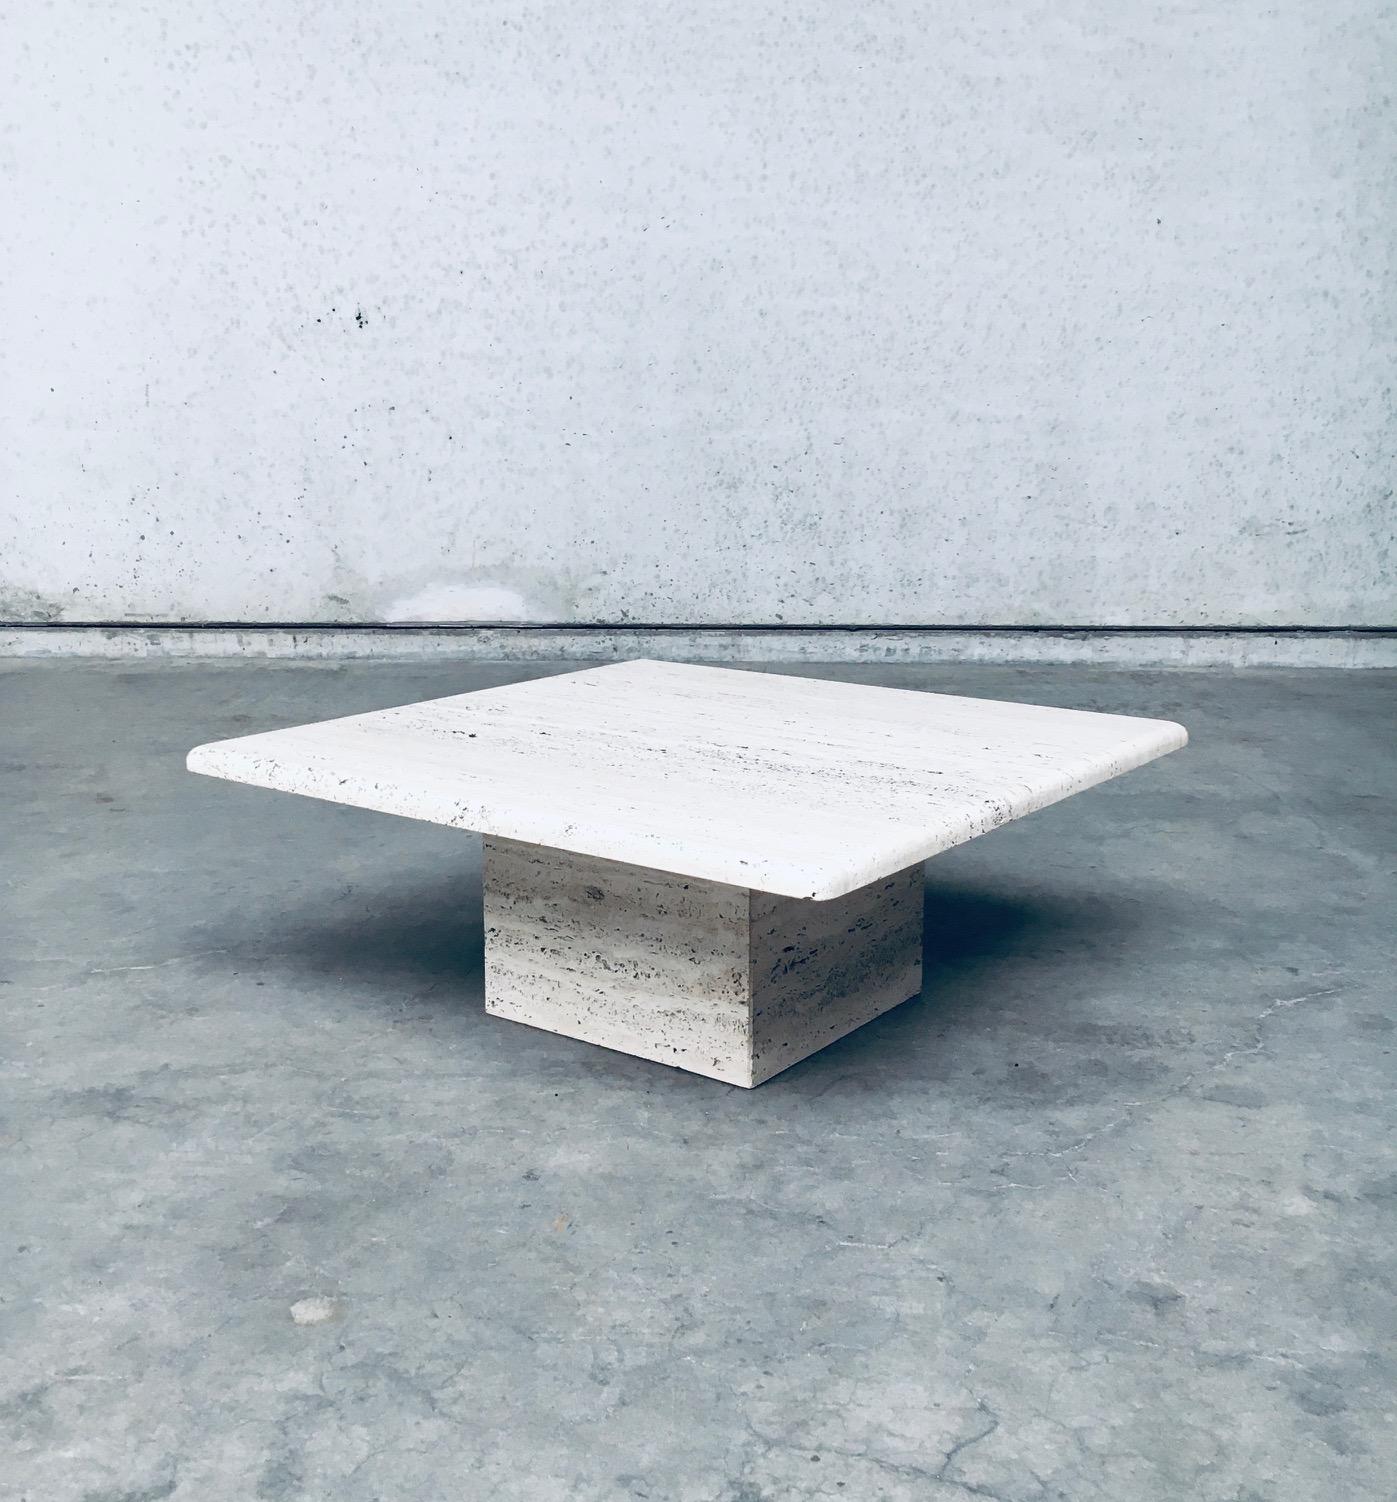 Vintage Midcentury Modern Italian Design Travertine Square Coffee Table. Made in Italy, 1970's. Thick travertine square top with beveled edge supported on a center square travertine base. Classic, elegant and timeless design with beautiful